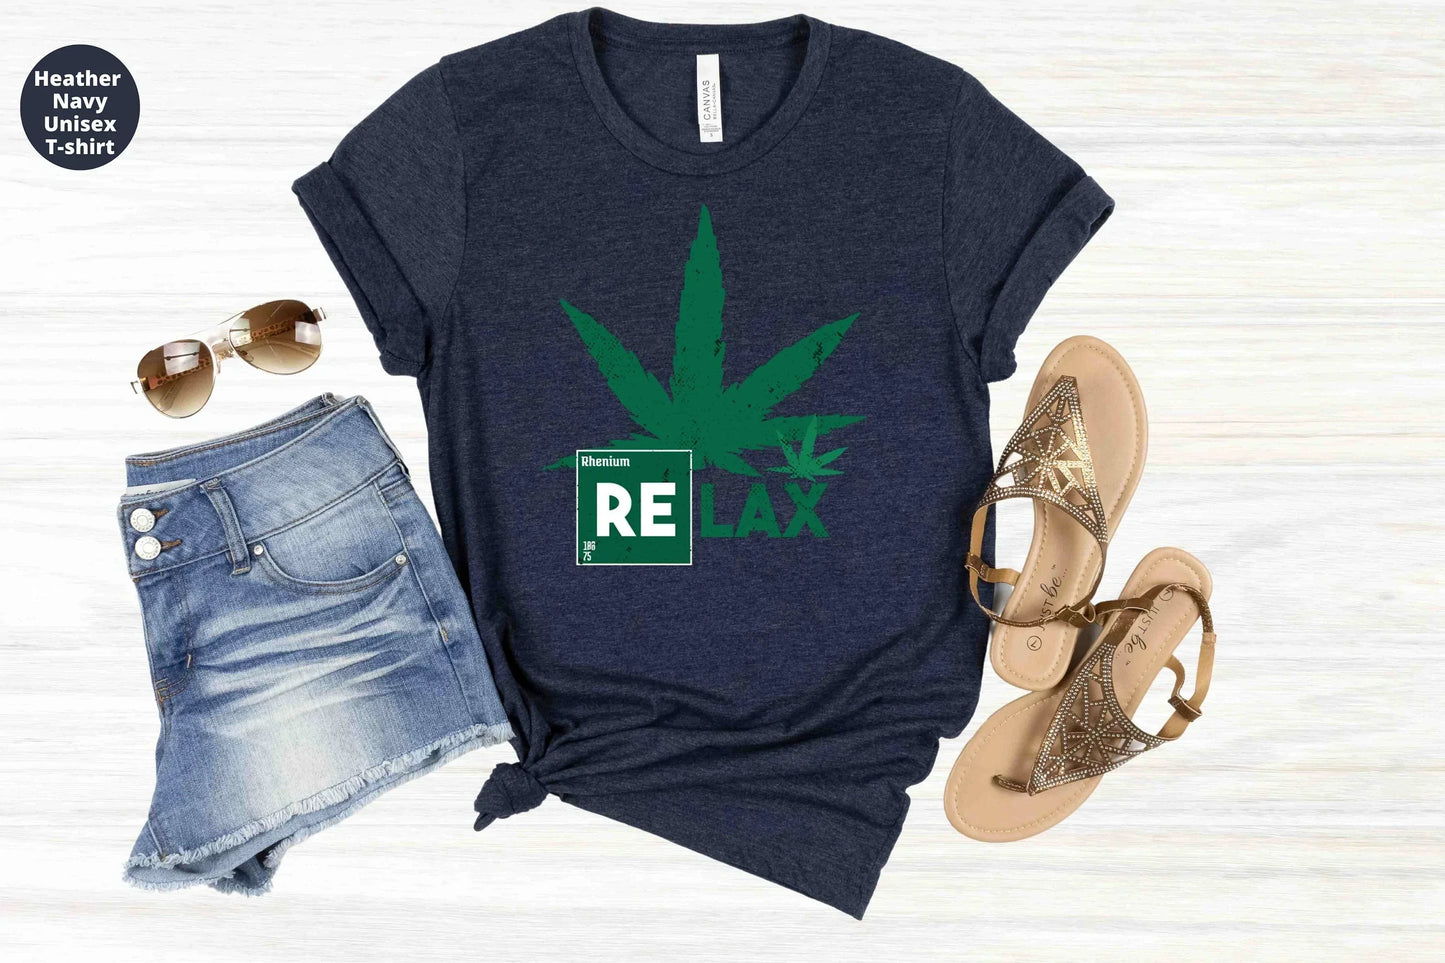 Stoner Shirt, Hippie Clothes, Marijuana Tshirt, Stoner Gifts for Him, Weed Shirt, 420 Gifts, Cannabis Clothing, Stoner Gifts for Her, 420 HMDesignStudioUS